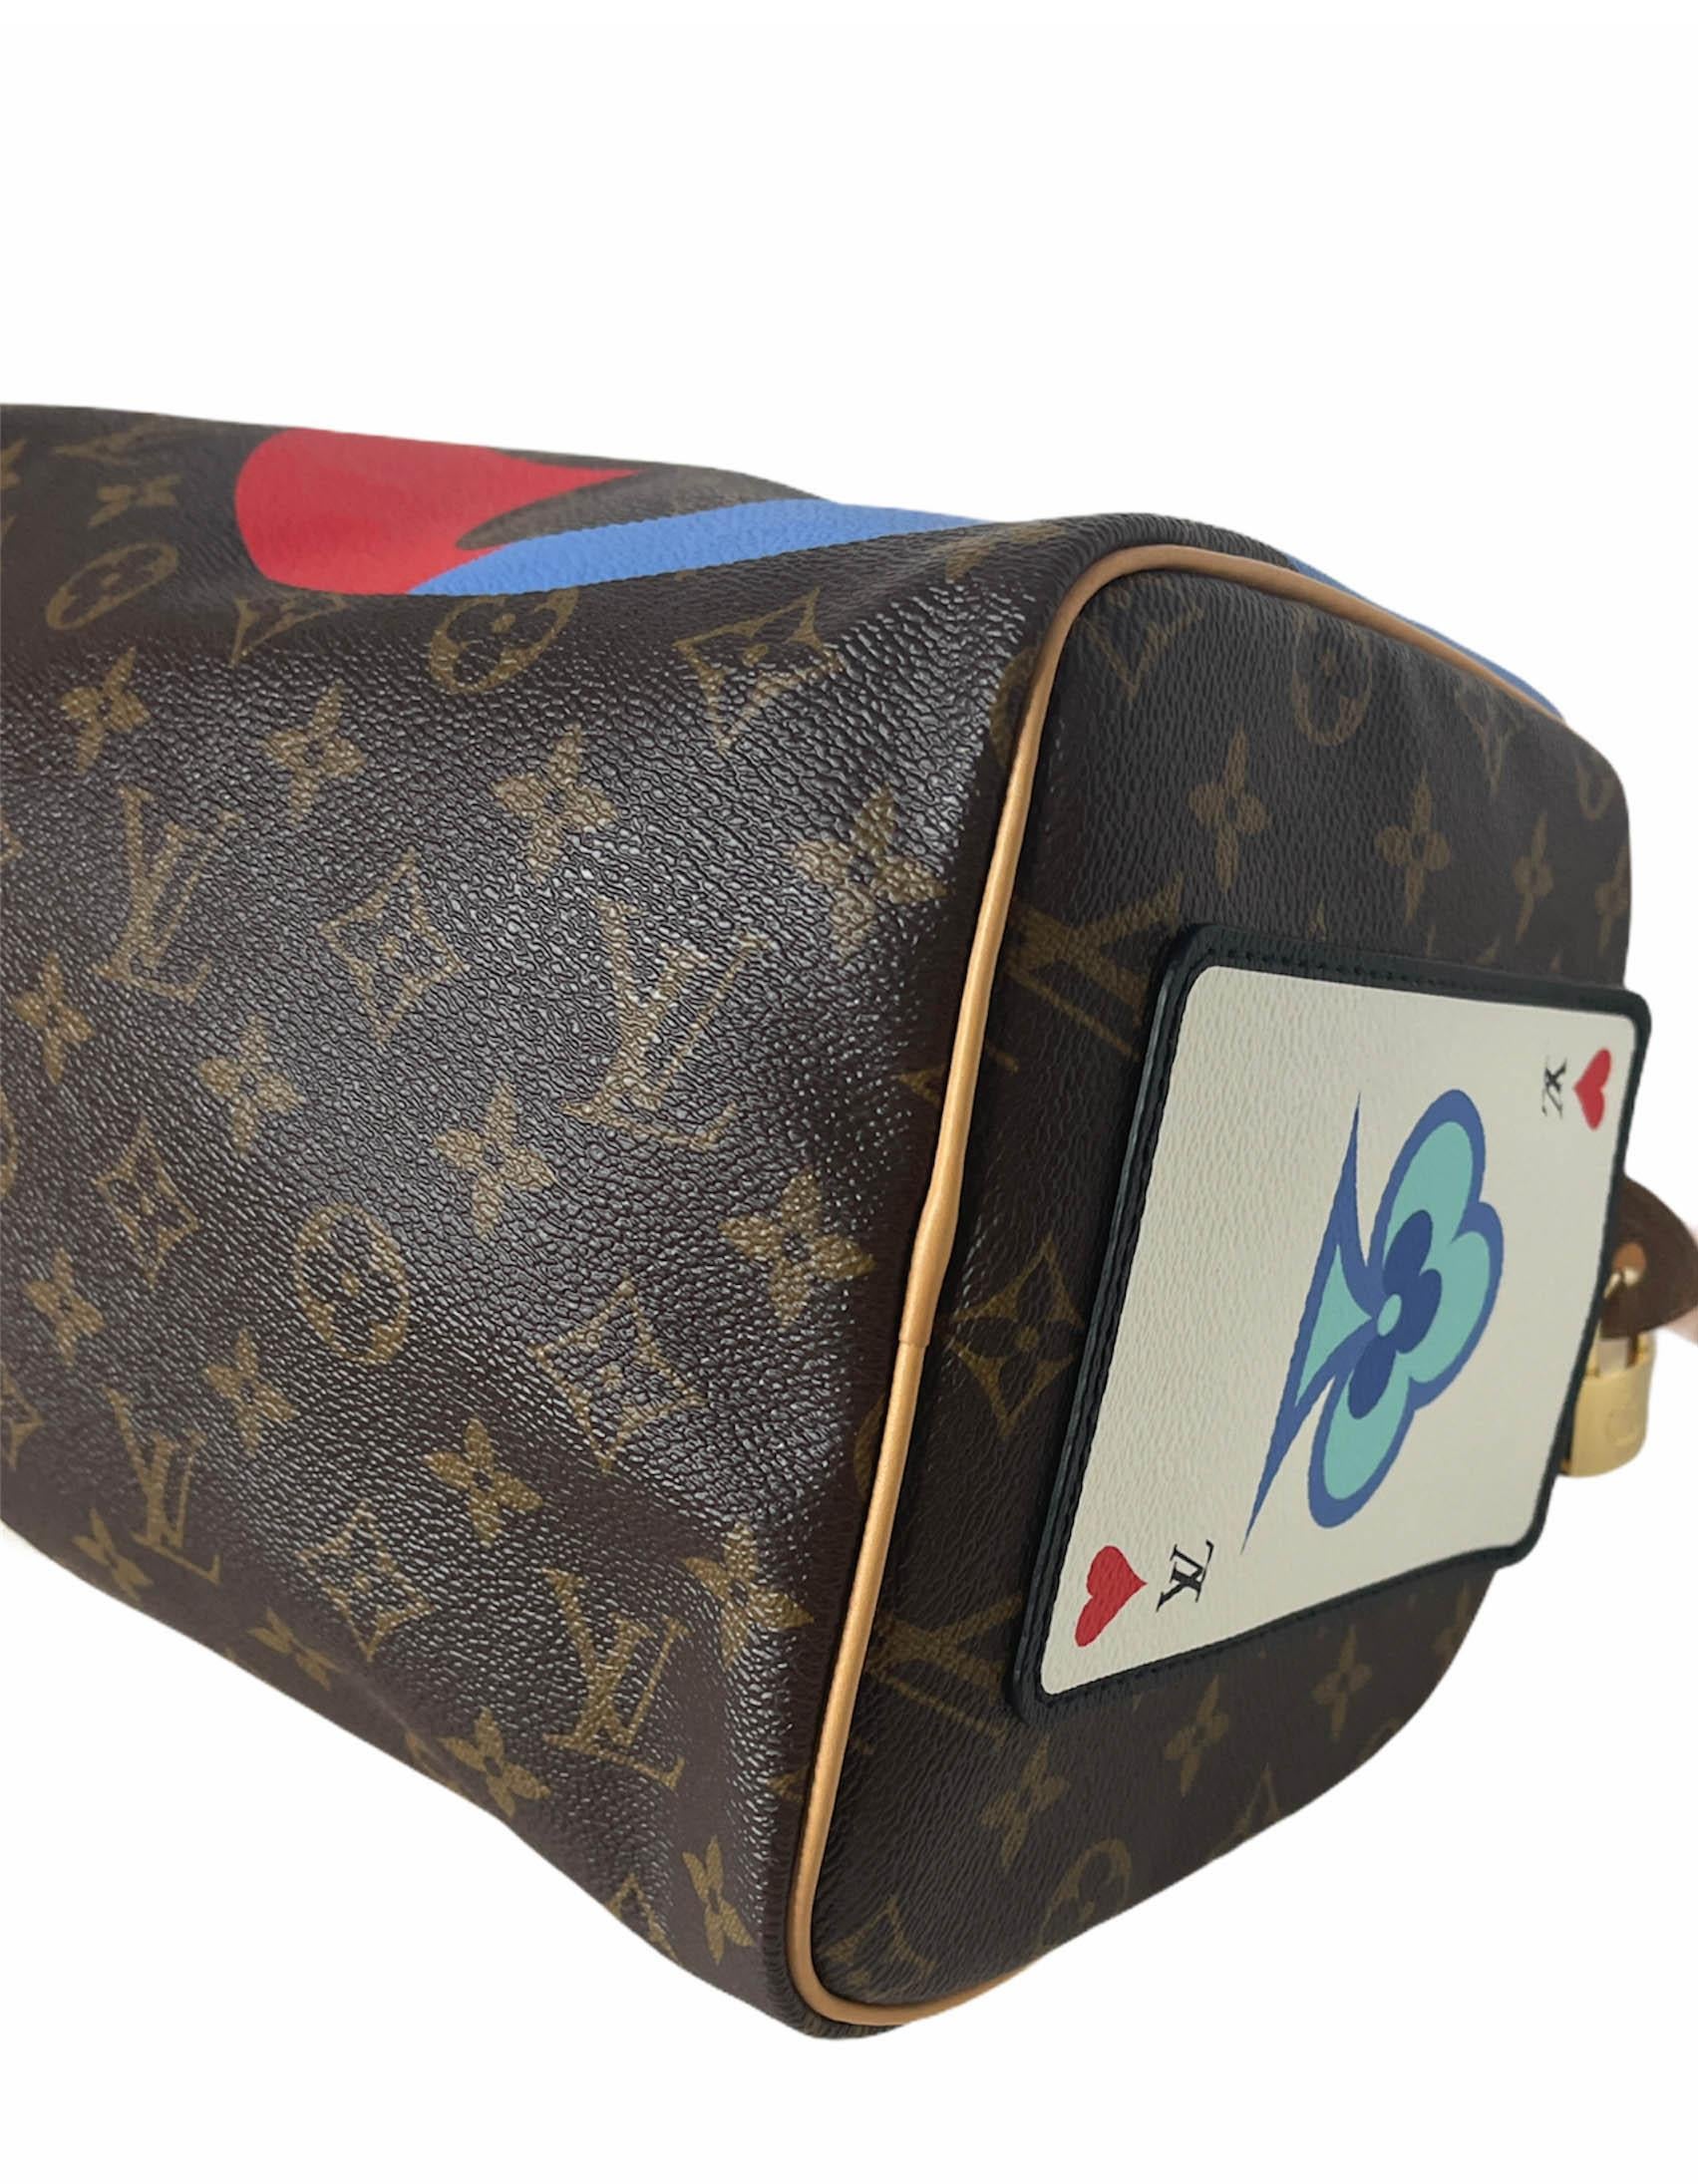 Louis Vuitton 2020 Limited Edition Game On Speedy Bandouliere 30 Crossbody Bag In Excellent Condition In New York, NY